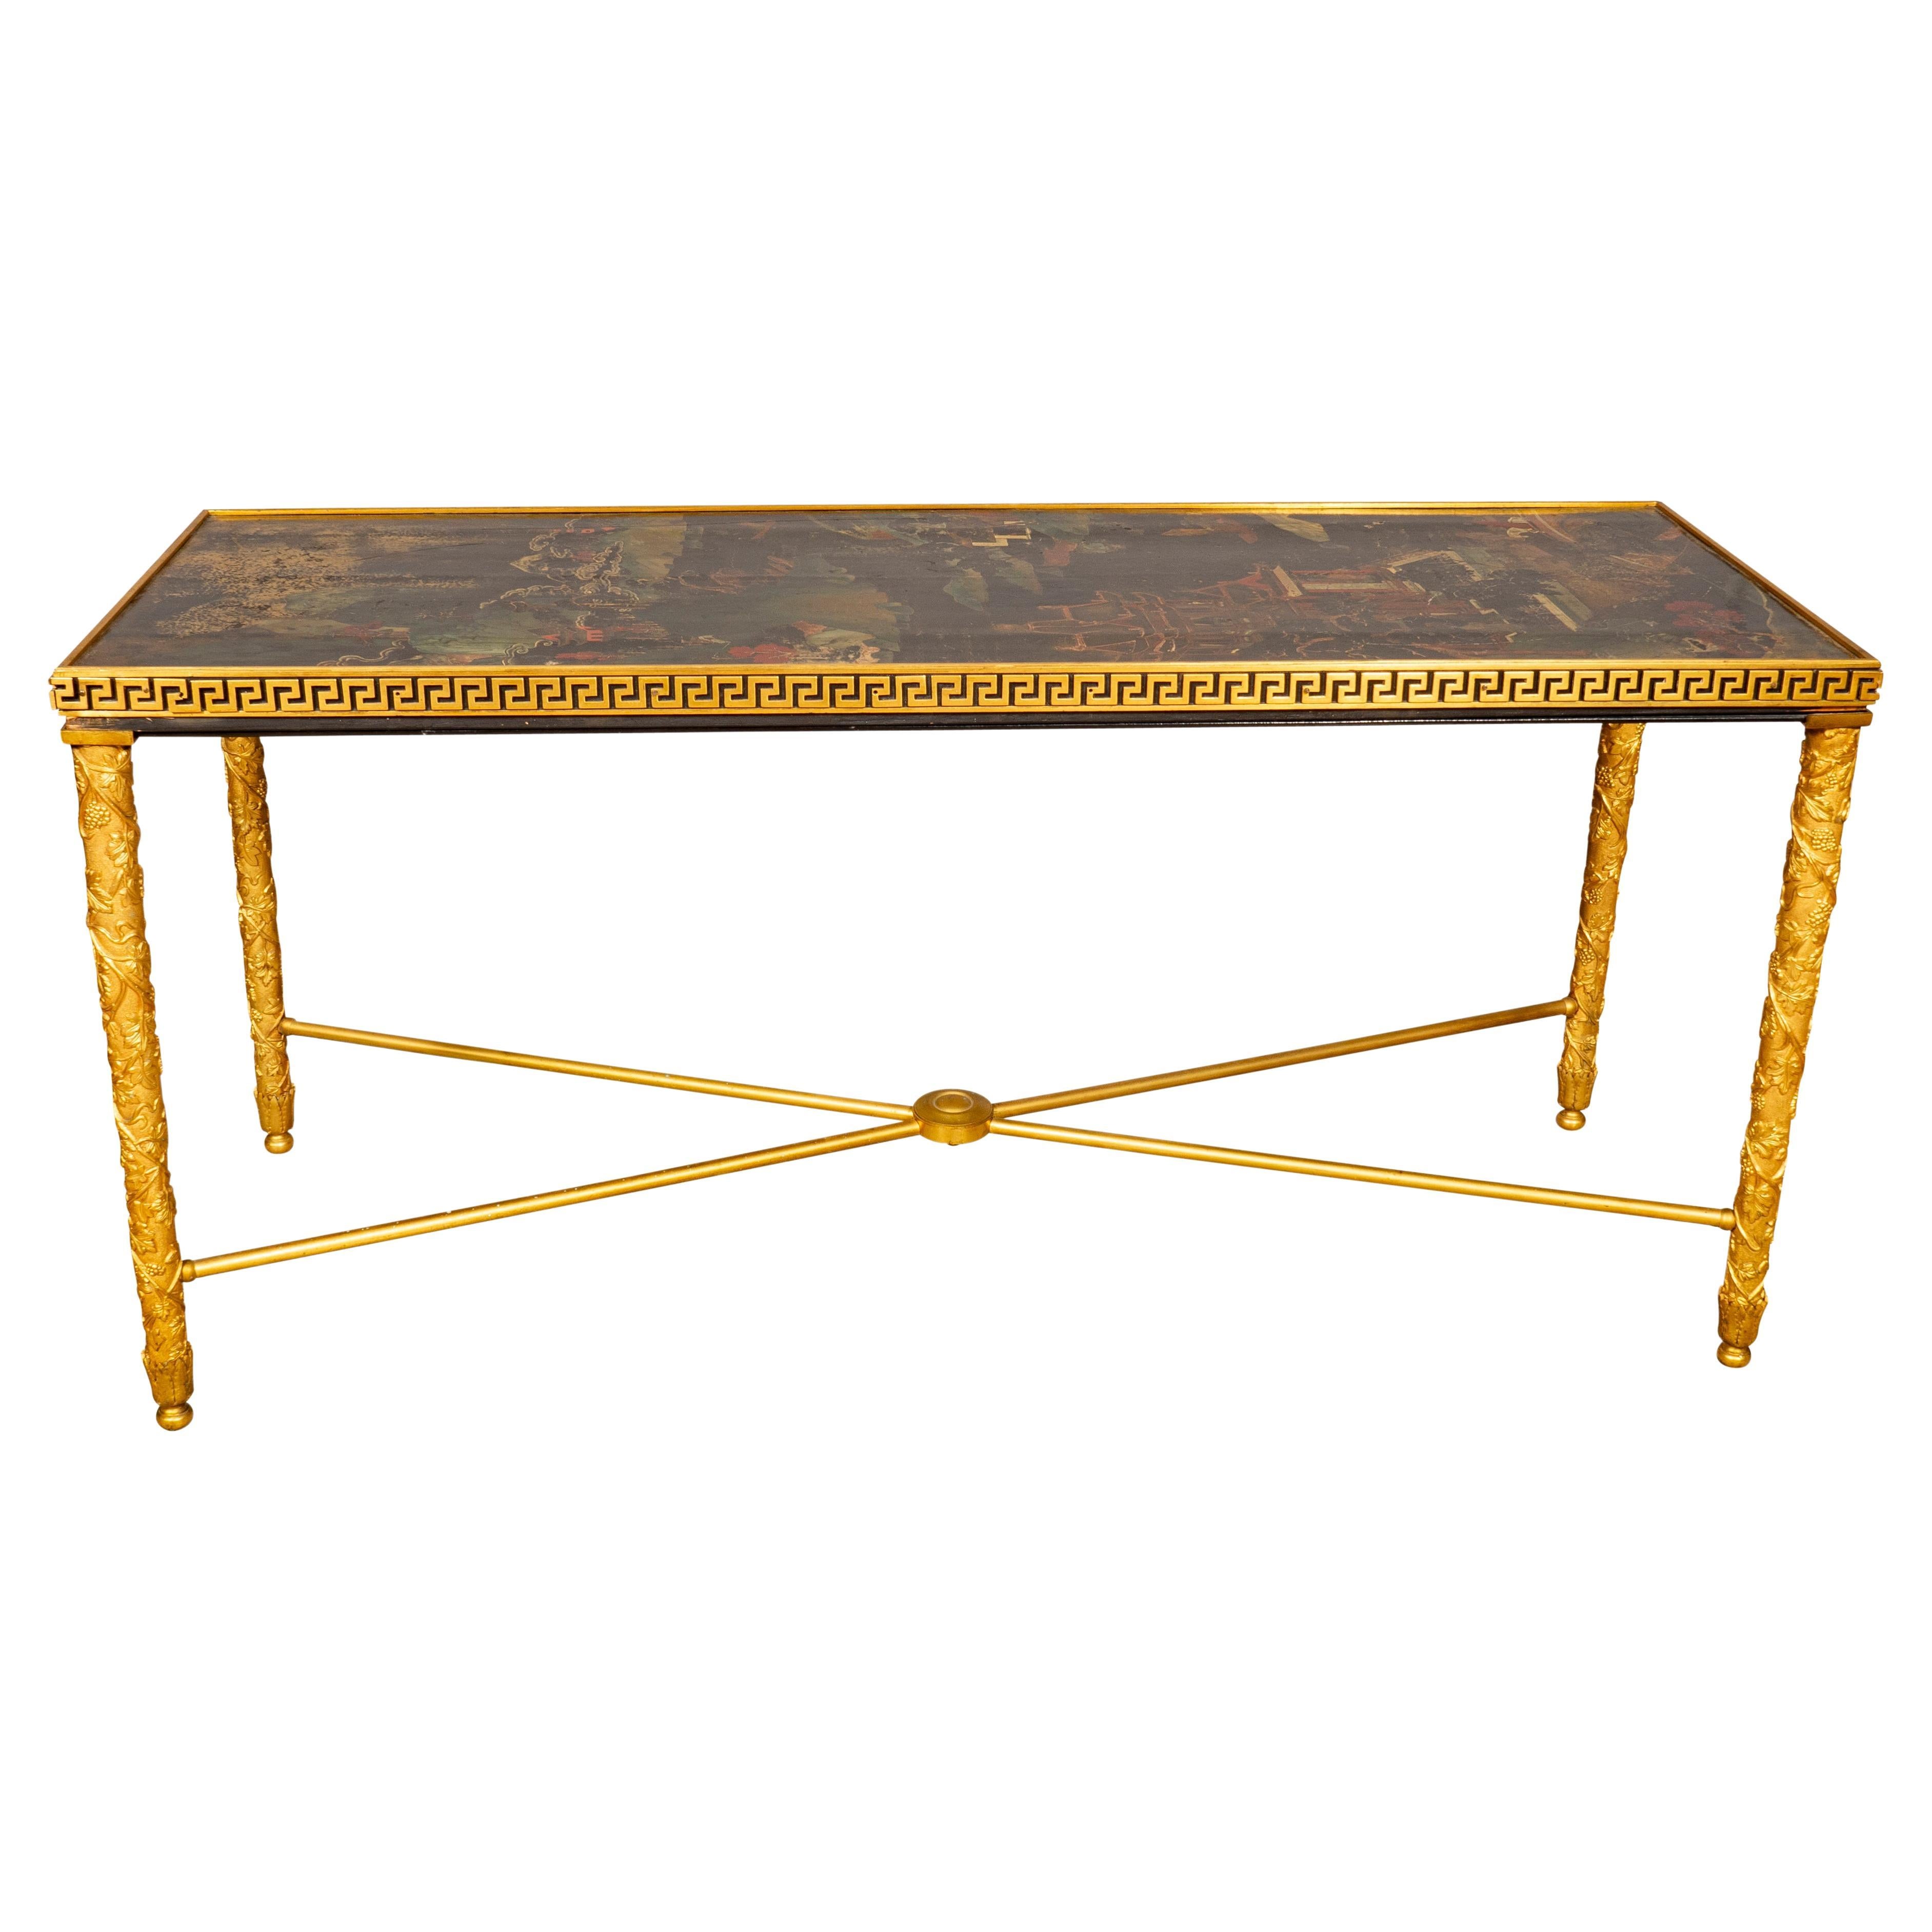 Maison Jansen Bronze and Lacquer Coffee Table